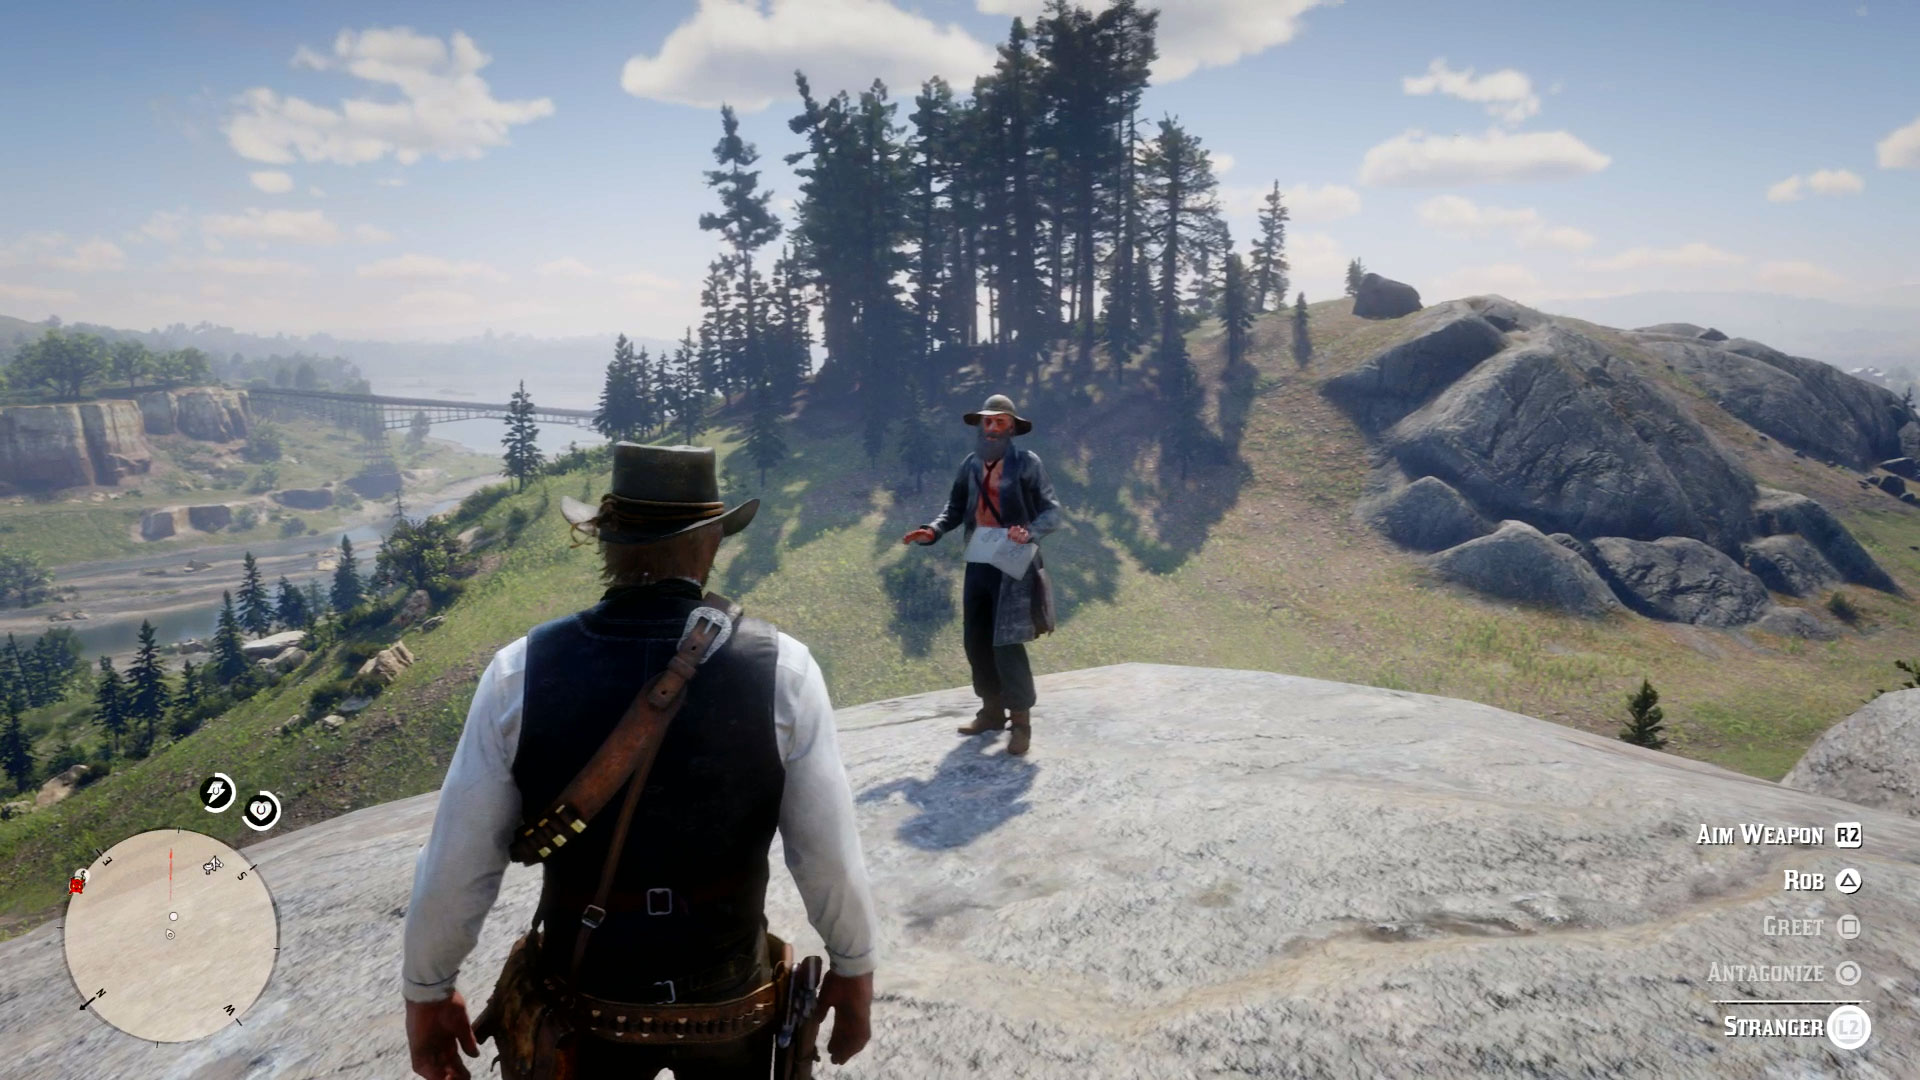 How To Solve The Red Dead Redemption 2 High Stakes Treasure Map Quest Xfaster